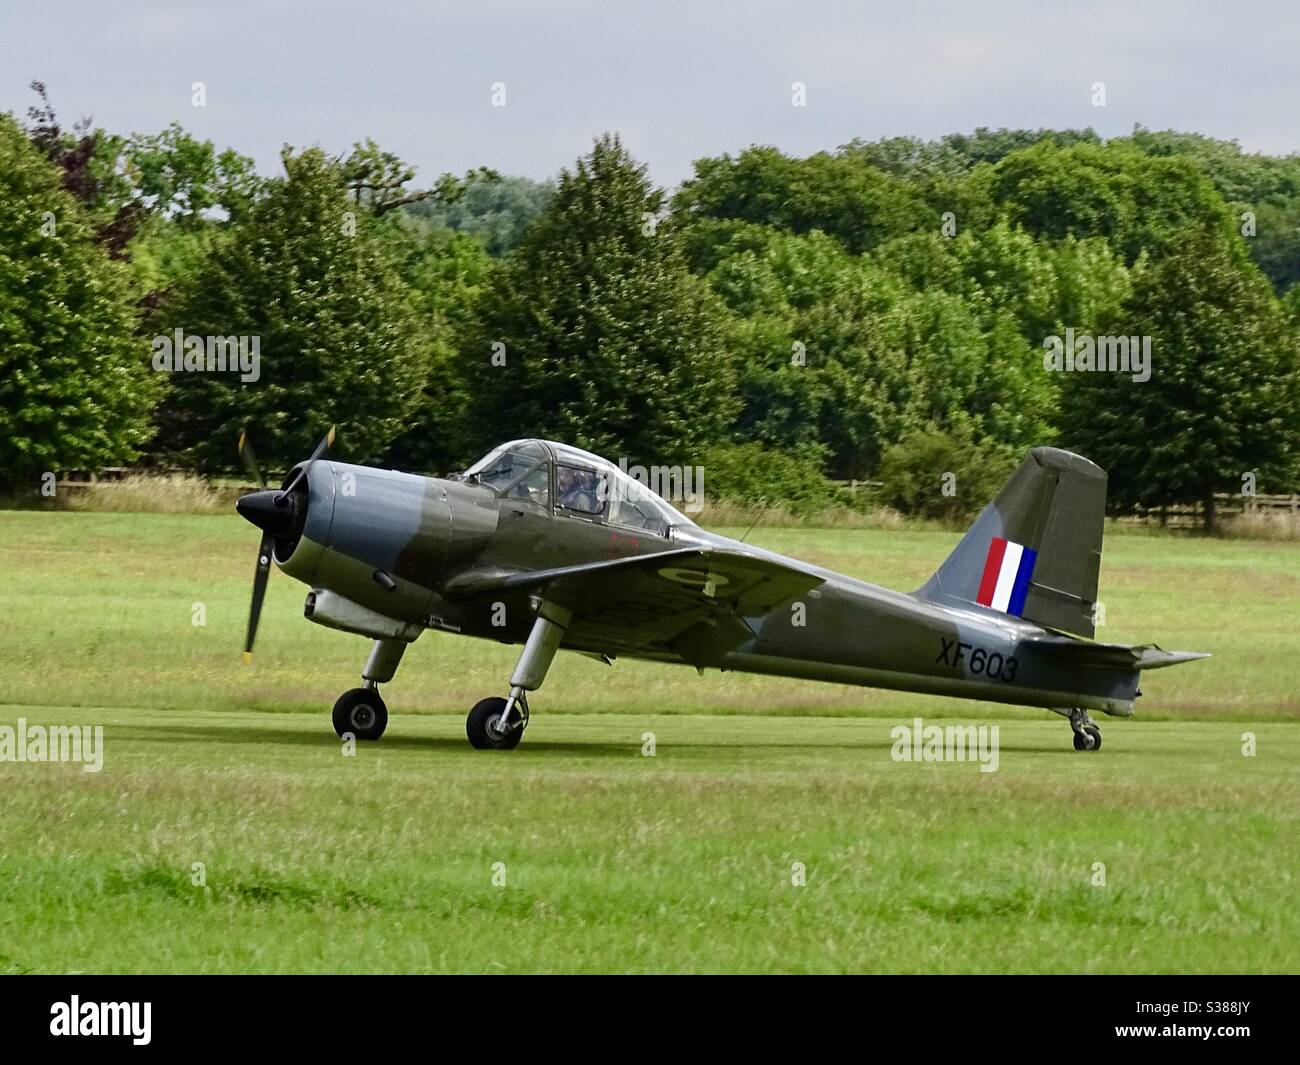 Provost aircraft just landed on a grass runway in England Stock Photo